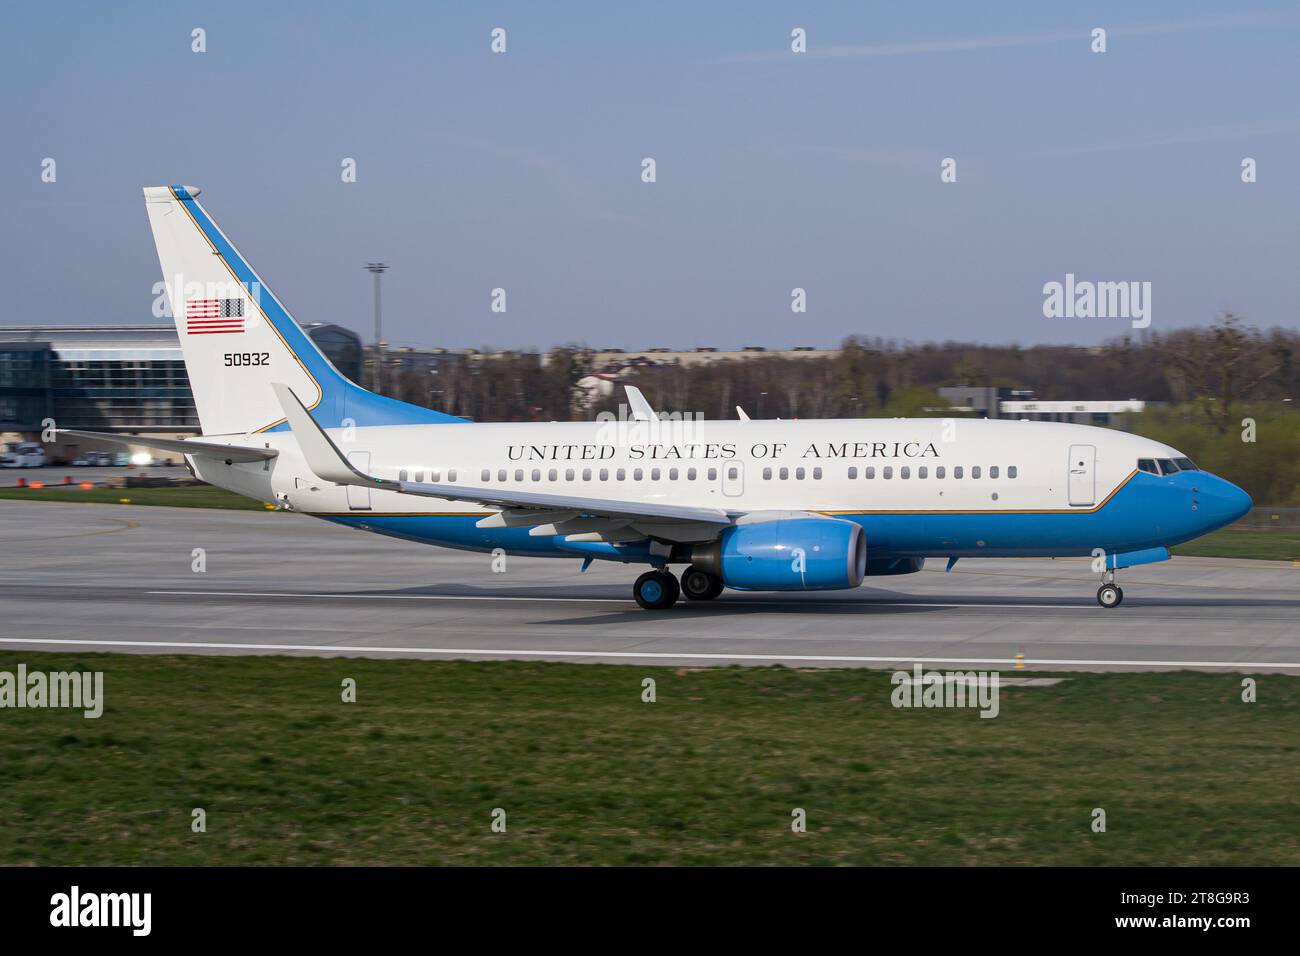 United States of America Governmental Boeing C-40 Clipper taking off from Lviv Airport Stock Photo